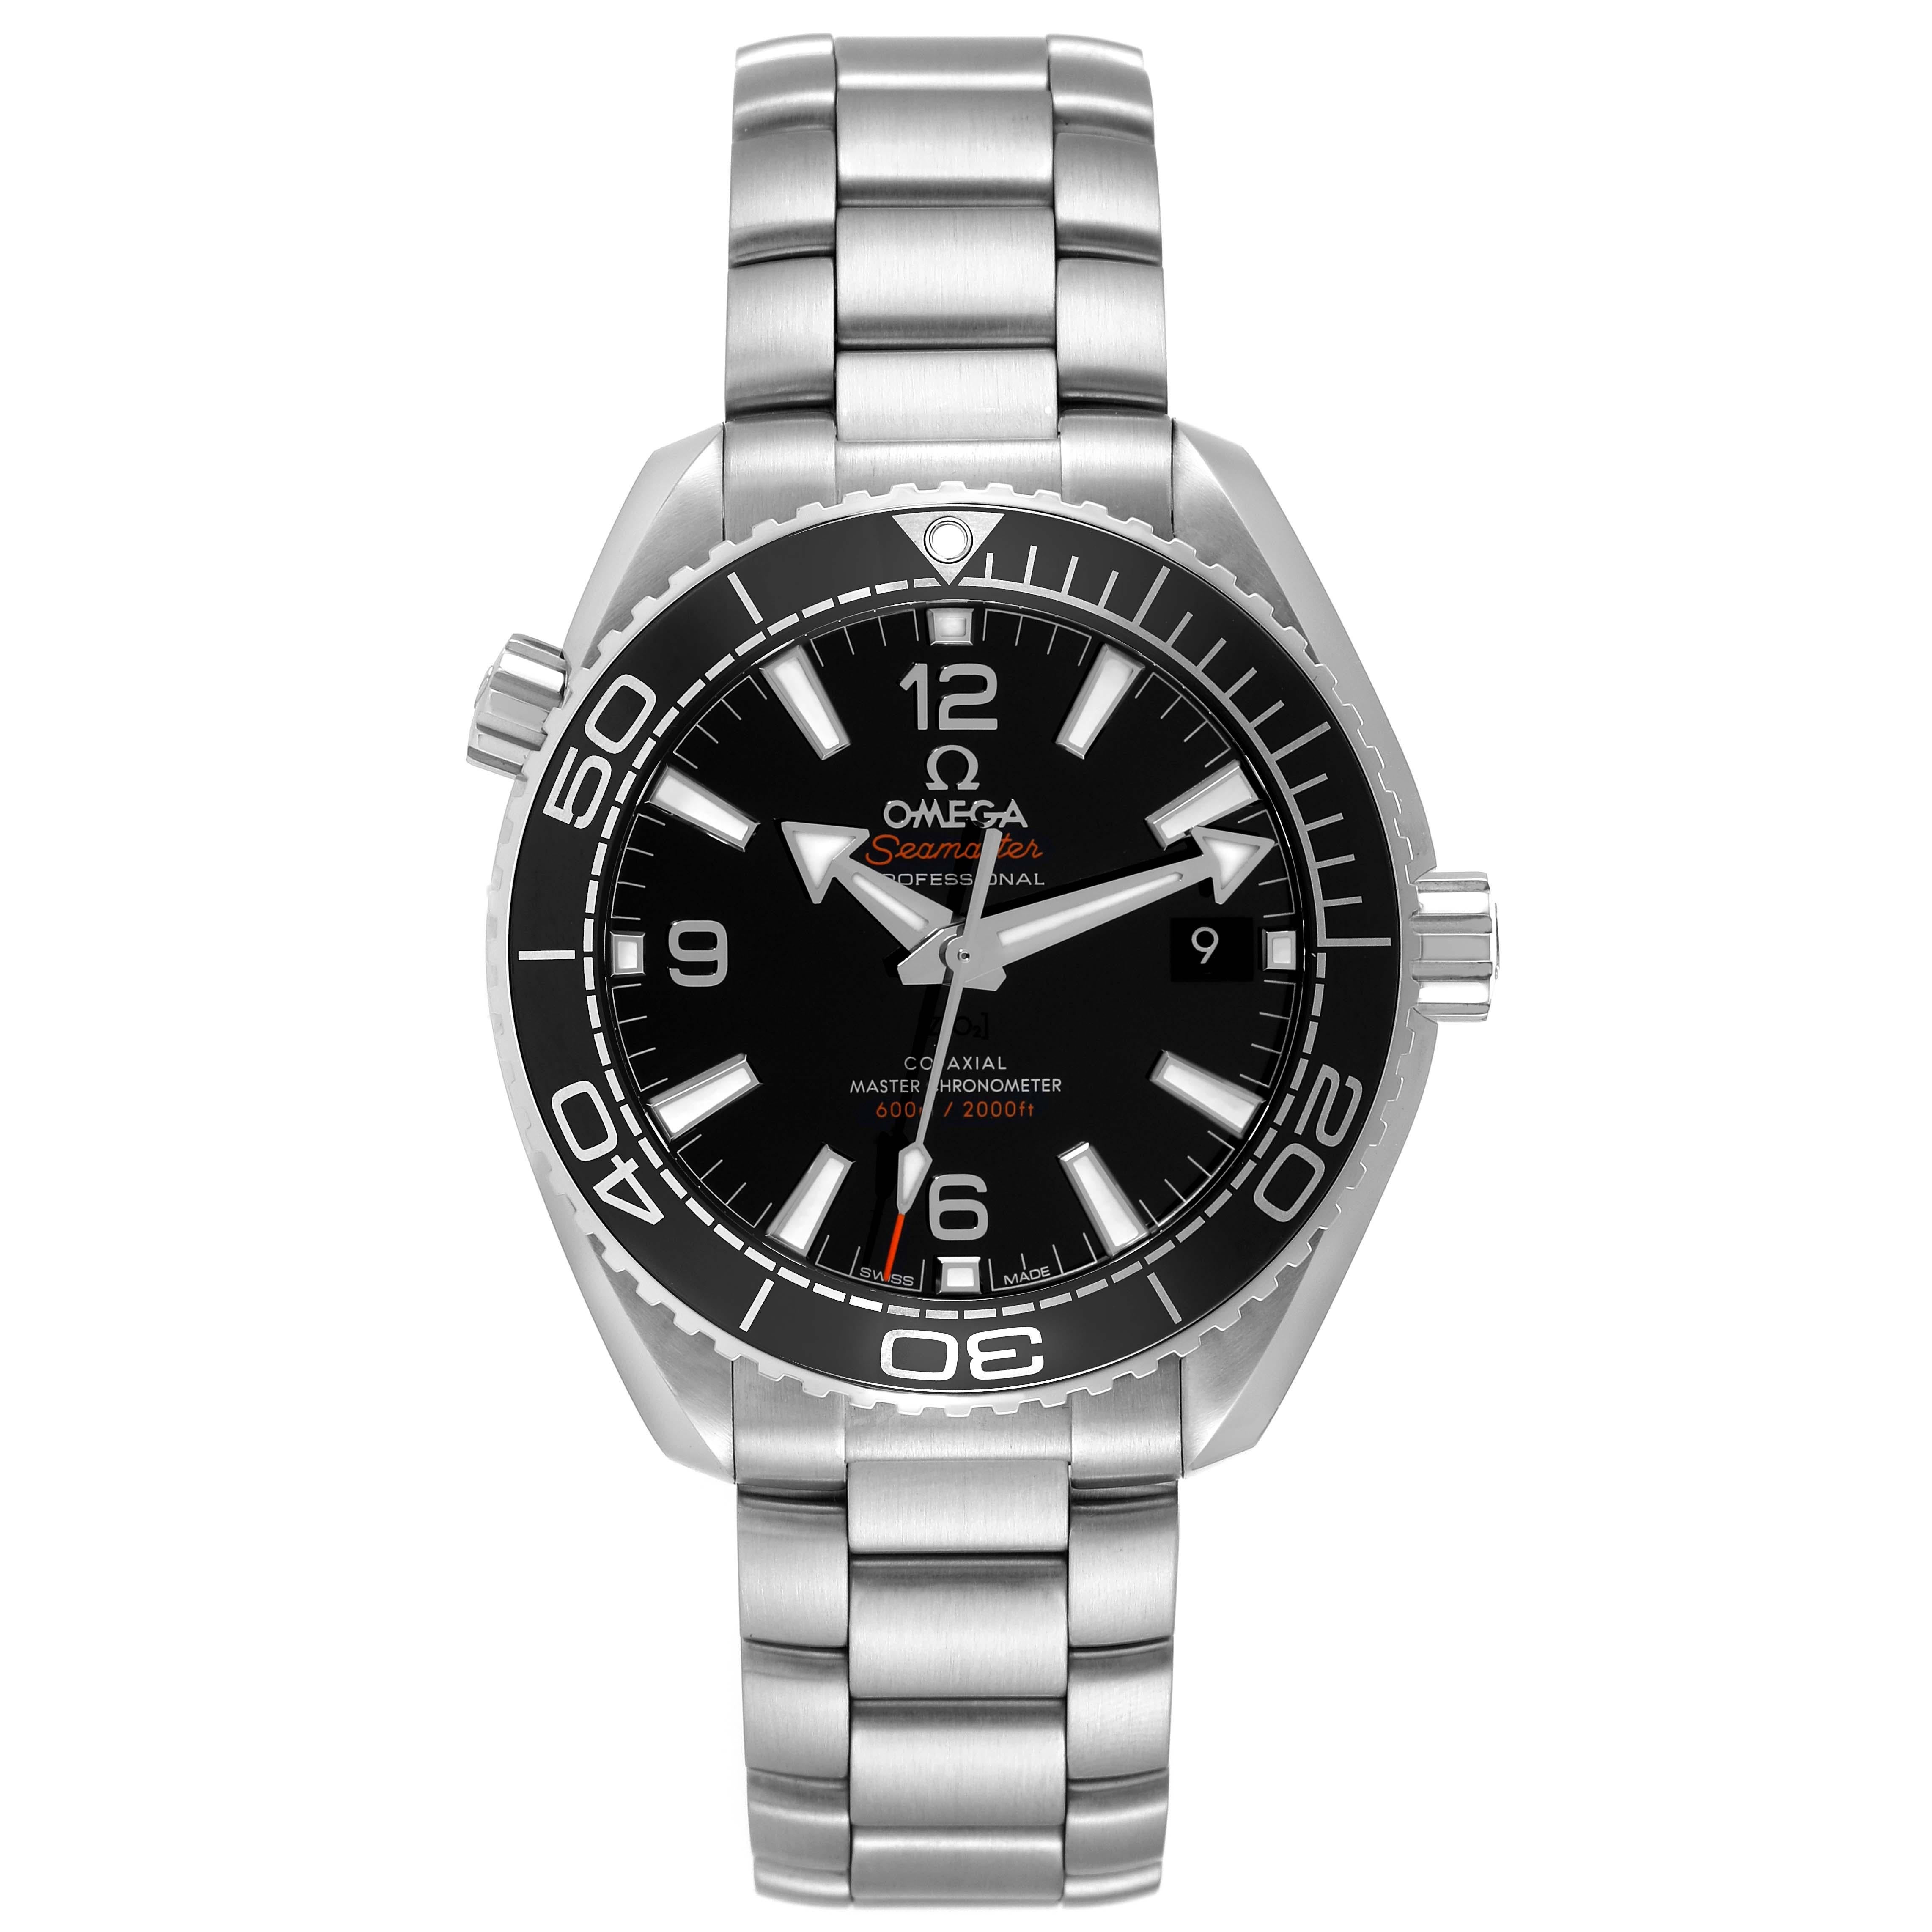 Omega Planet Ocean 600m Black Dial Steel Mens Watch 215.30.40.20.01.001 Box Card. Automatic Self-winding movement with Co-Axial escapement. Certified Master Chronometer, approved by METAS, Resistant to magnetic fields reaching 15,000 gauss. Free